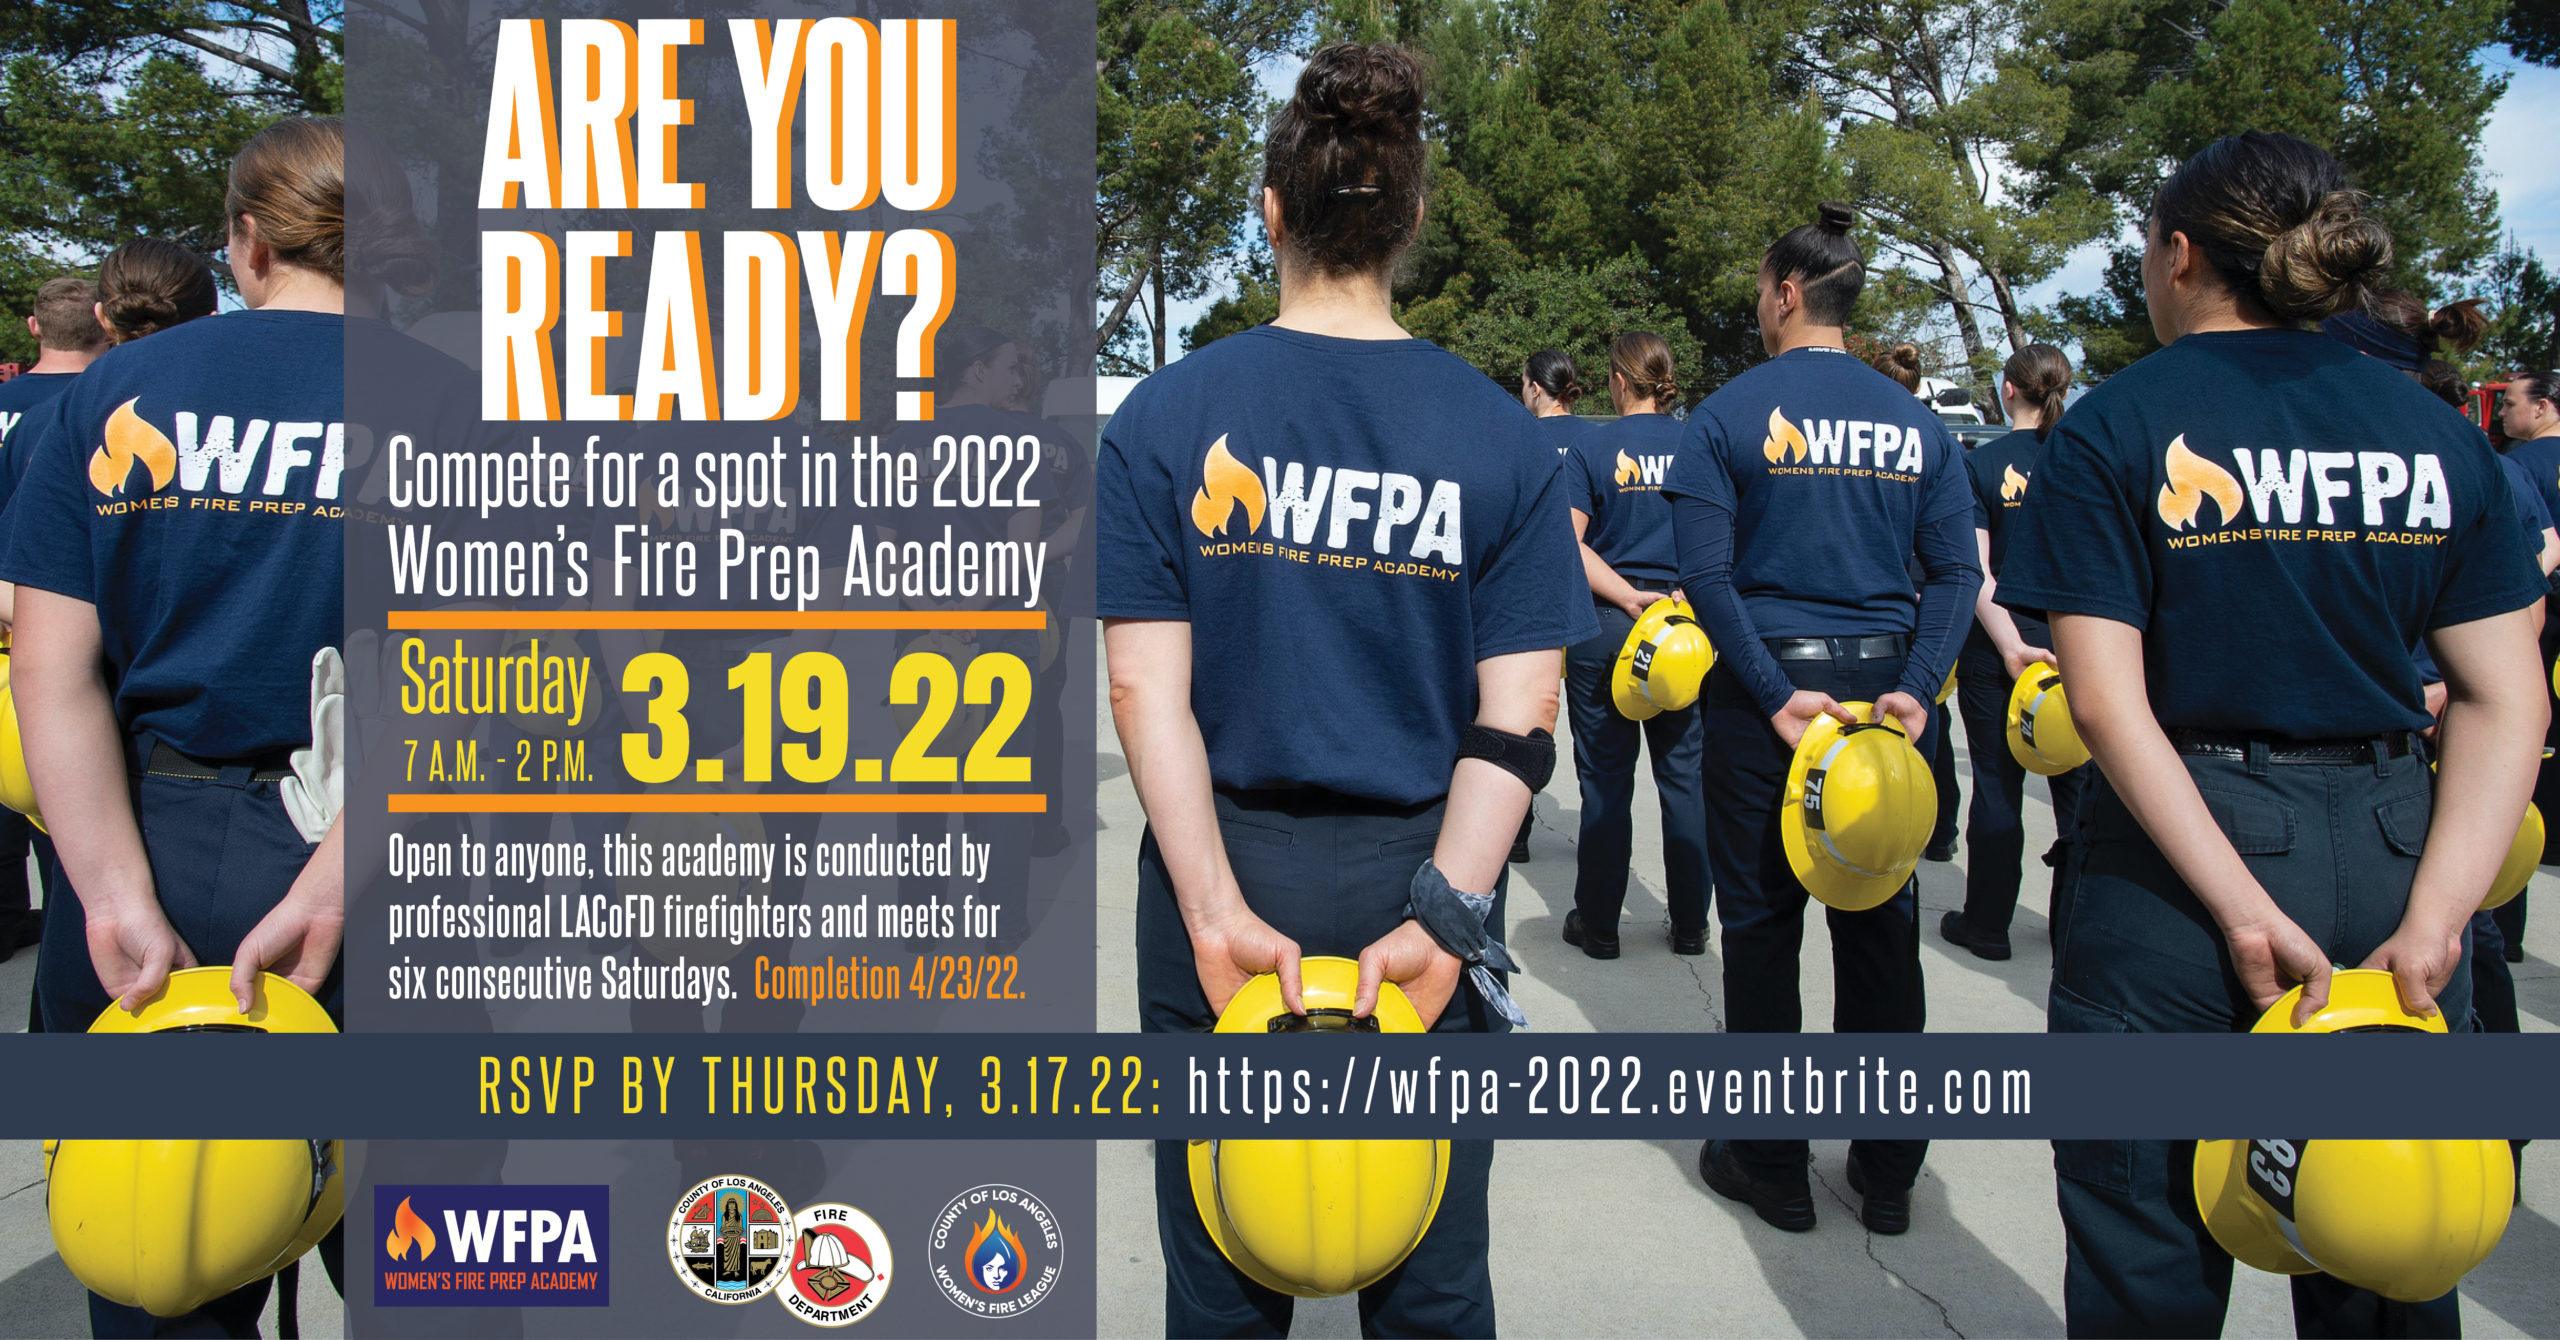 Are you ready? Compete for a spot in the 2022 Women's Fire Prep Academy